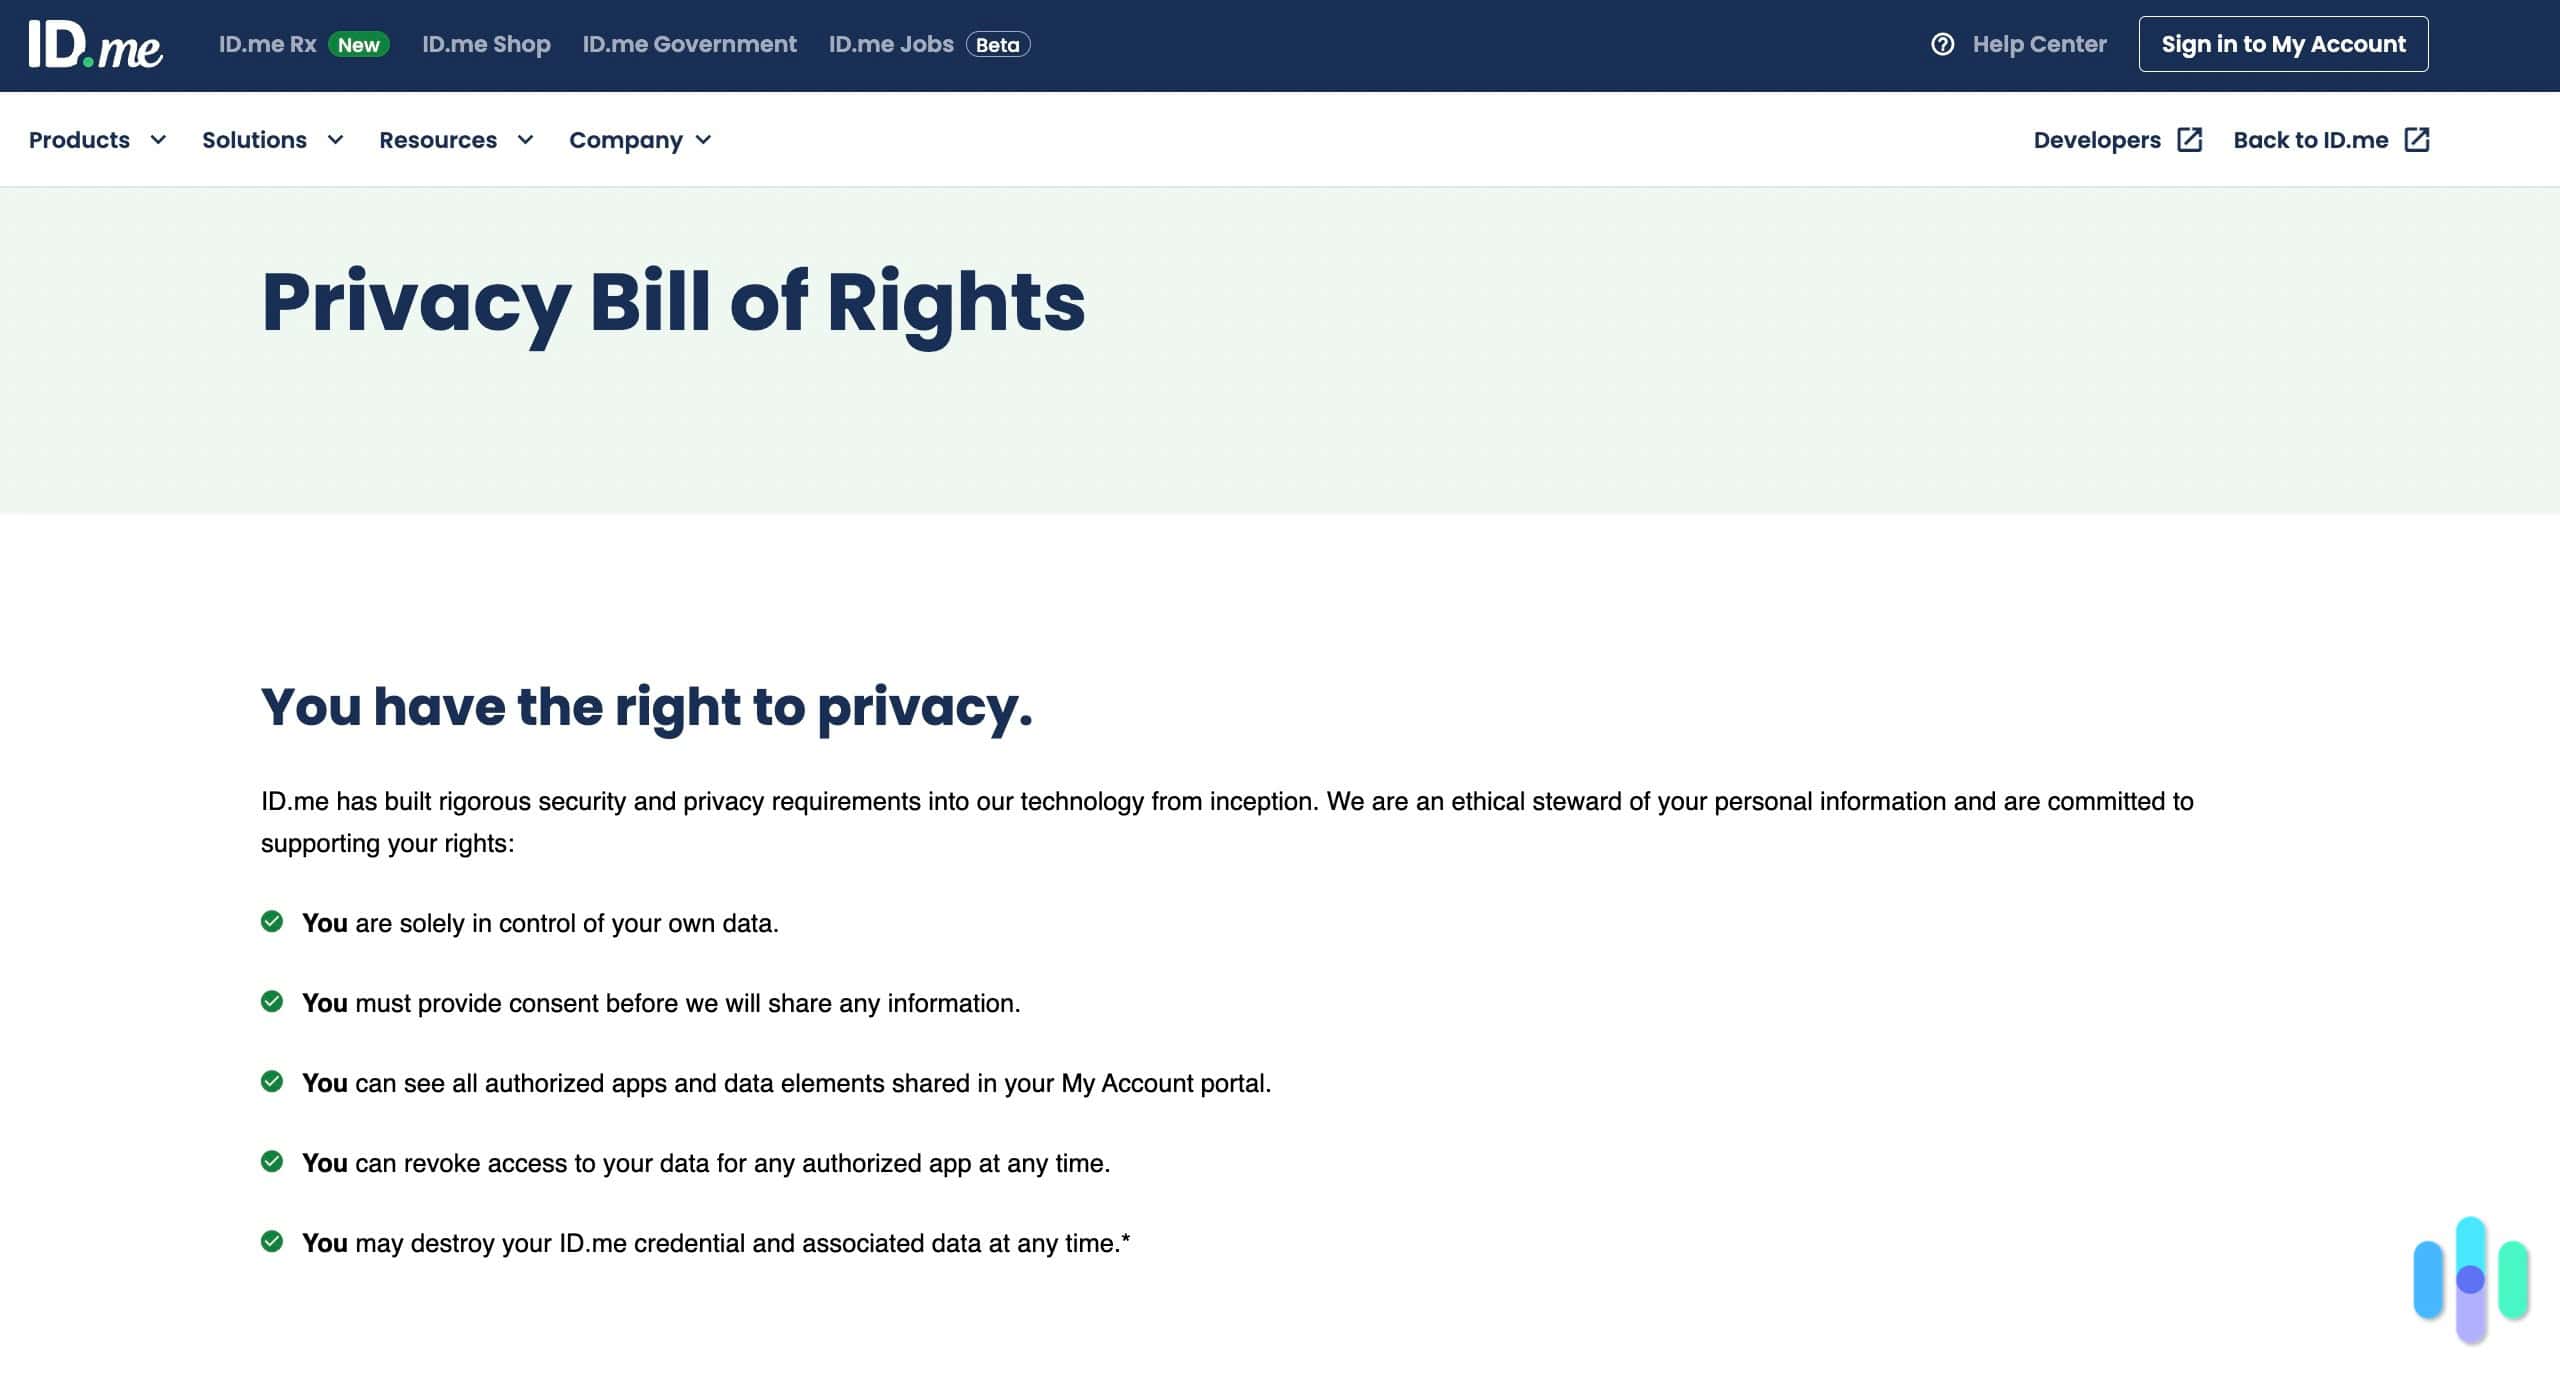 ID.me Privacy Bill of Rights